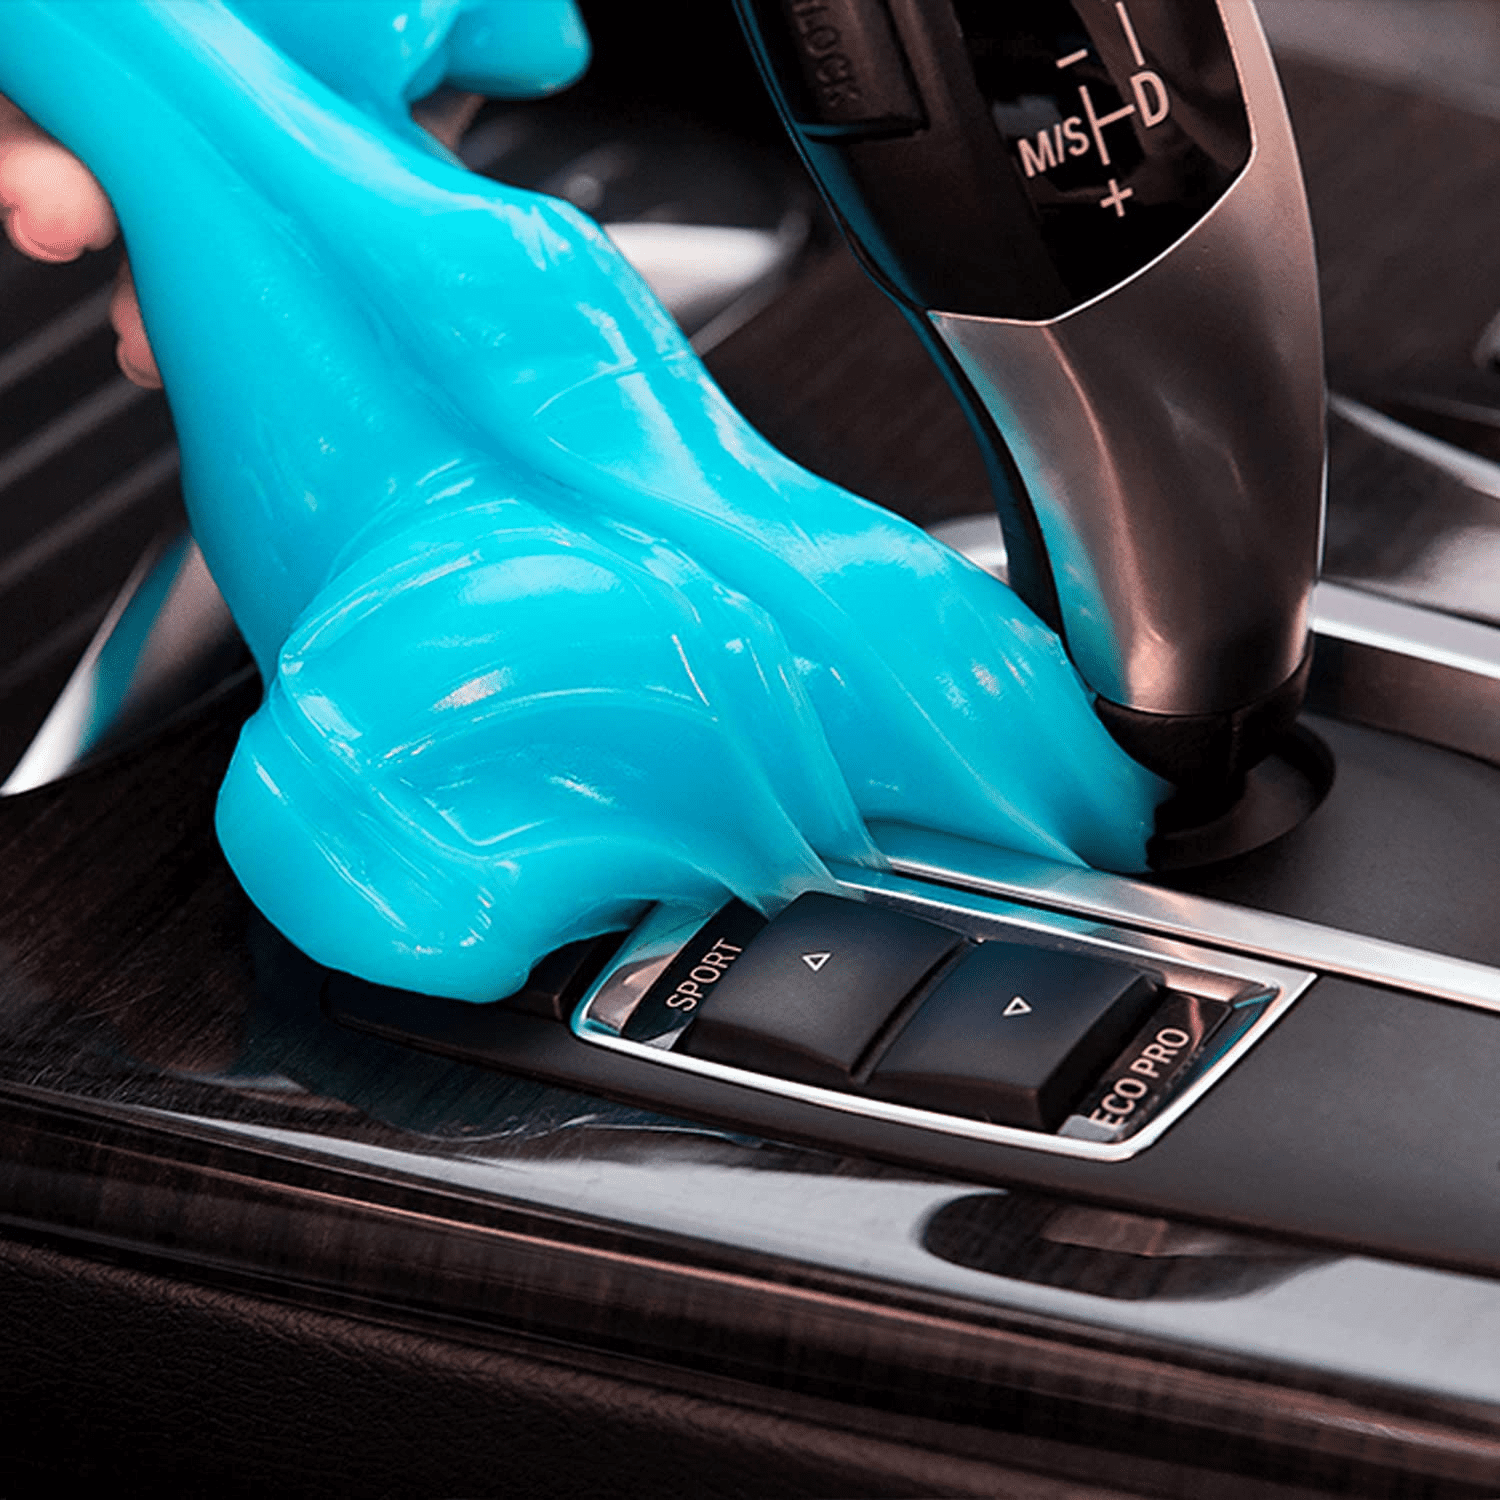 Car Accessories for Women Car Cleaning Gel Keyboard Cleaner Car Detailing  Putty Auto Slime Cleaning Goo Magic Dust Cleaning Tool for Keyboards, Car